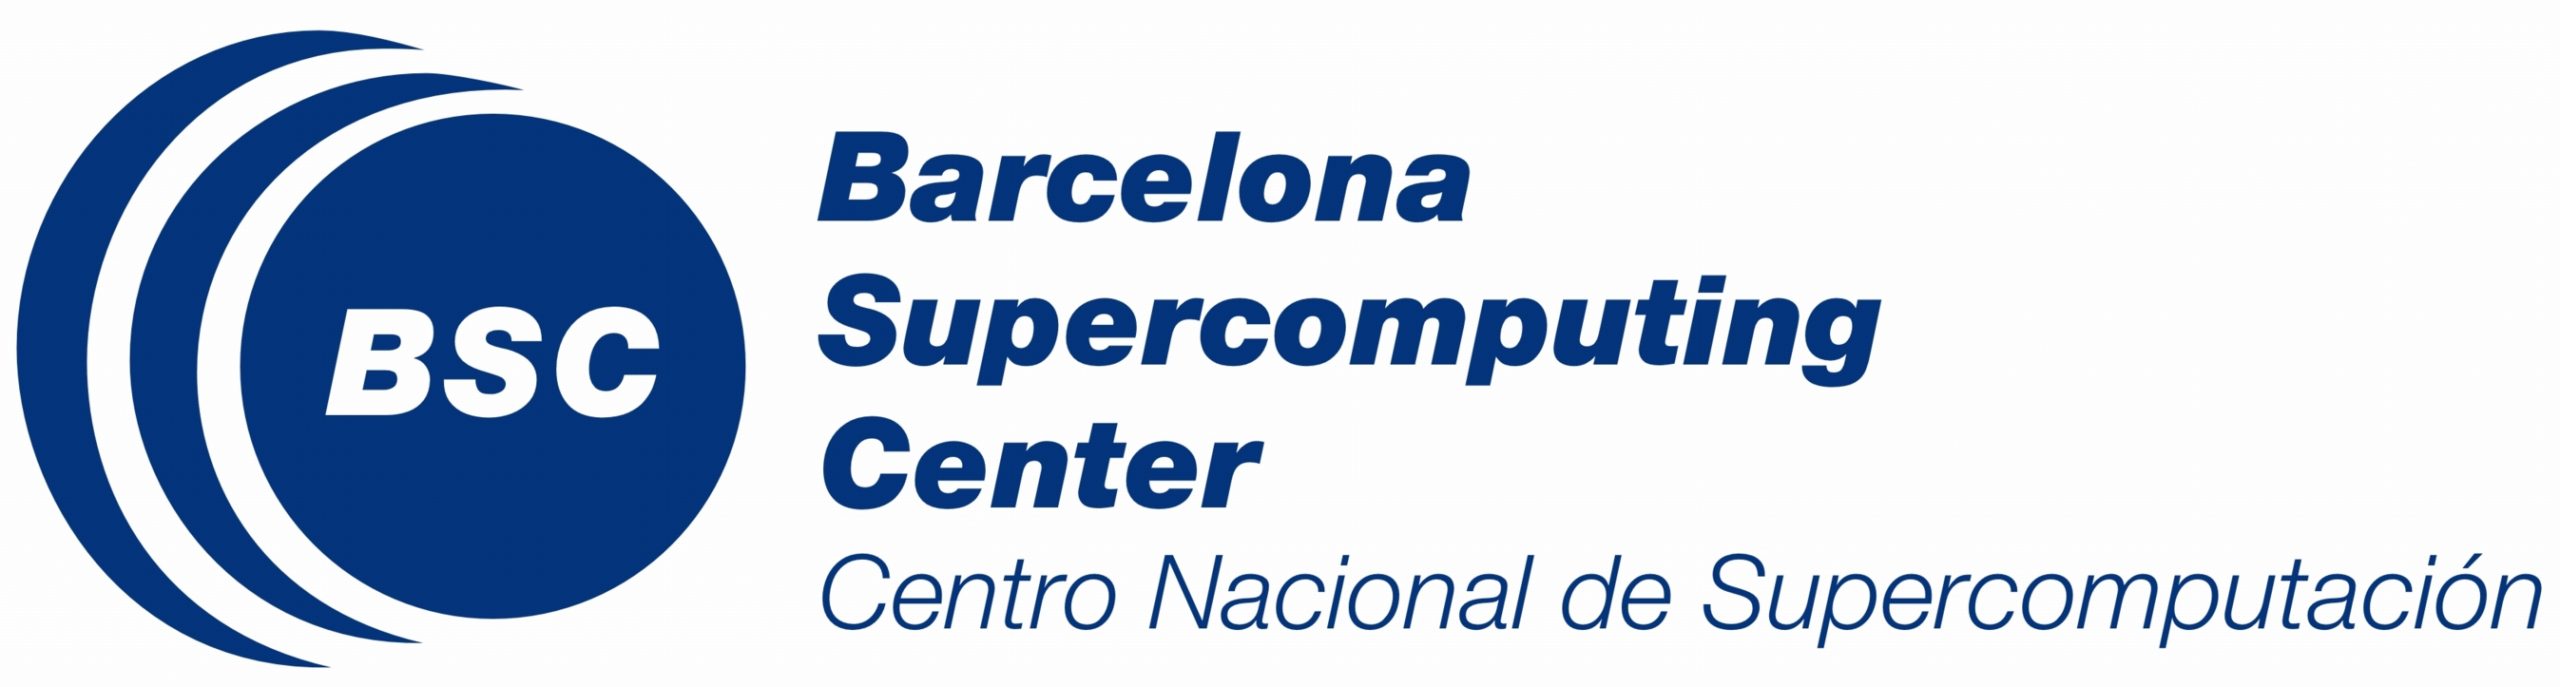 BSC-CNS